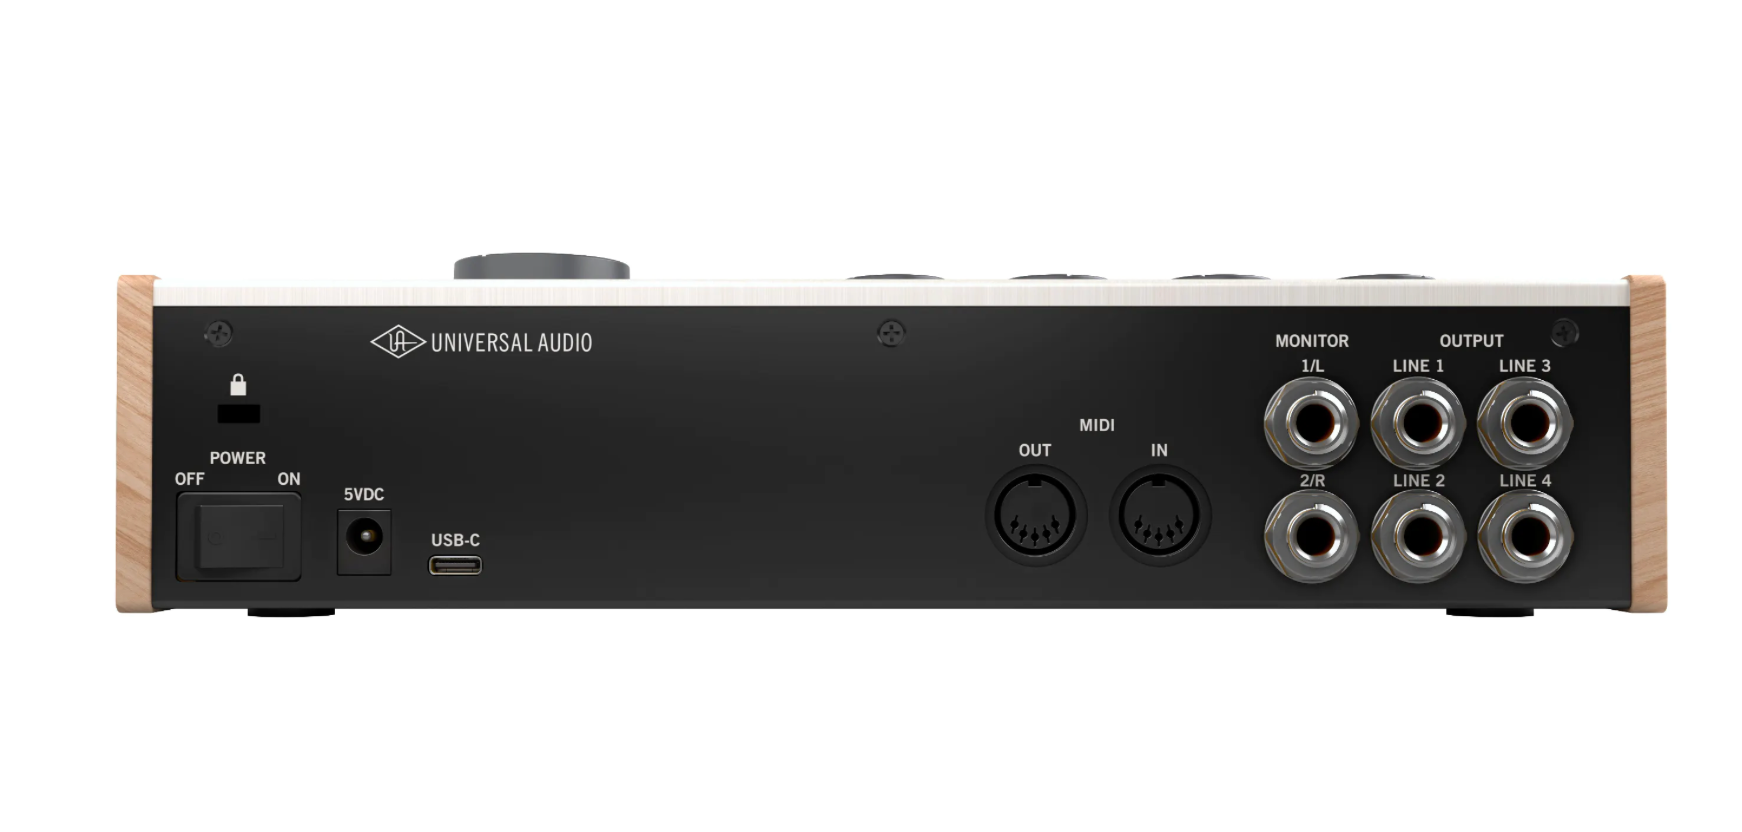 UNIVERSAL AUDIO VOLT 476P 4-IN/4-OUT USB 2.0 AUDIO INTERFACE